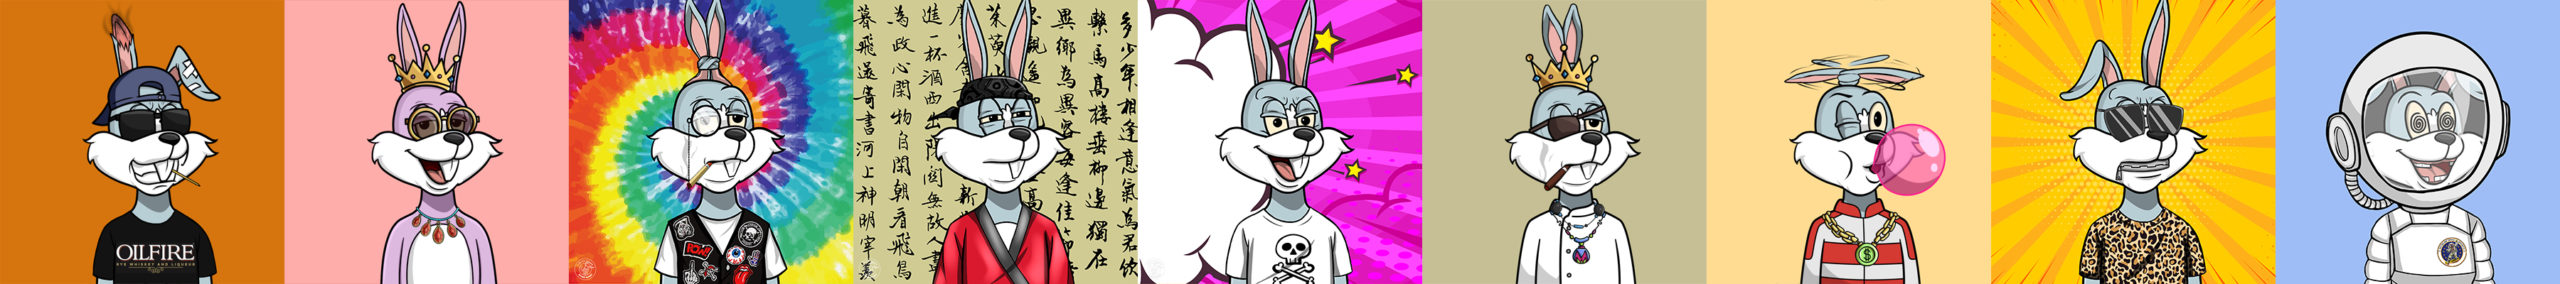 Ether Bunny - NFT Character